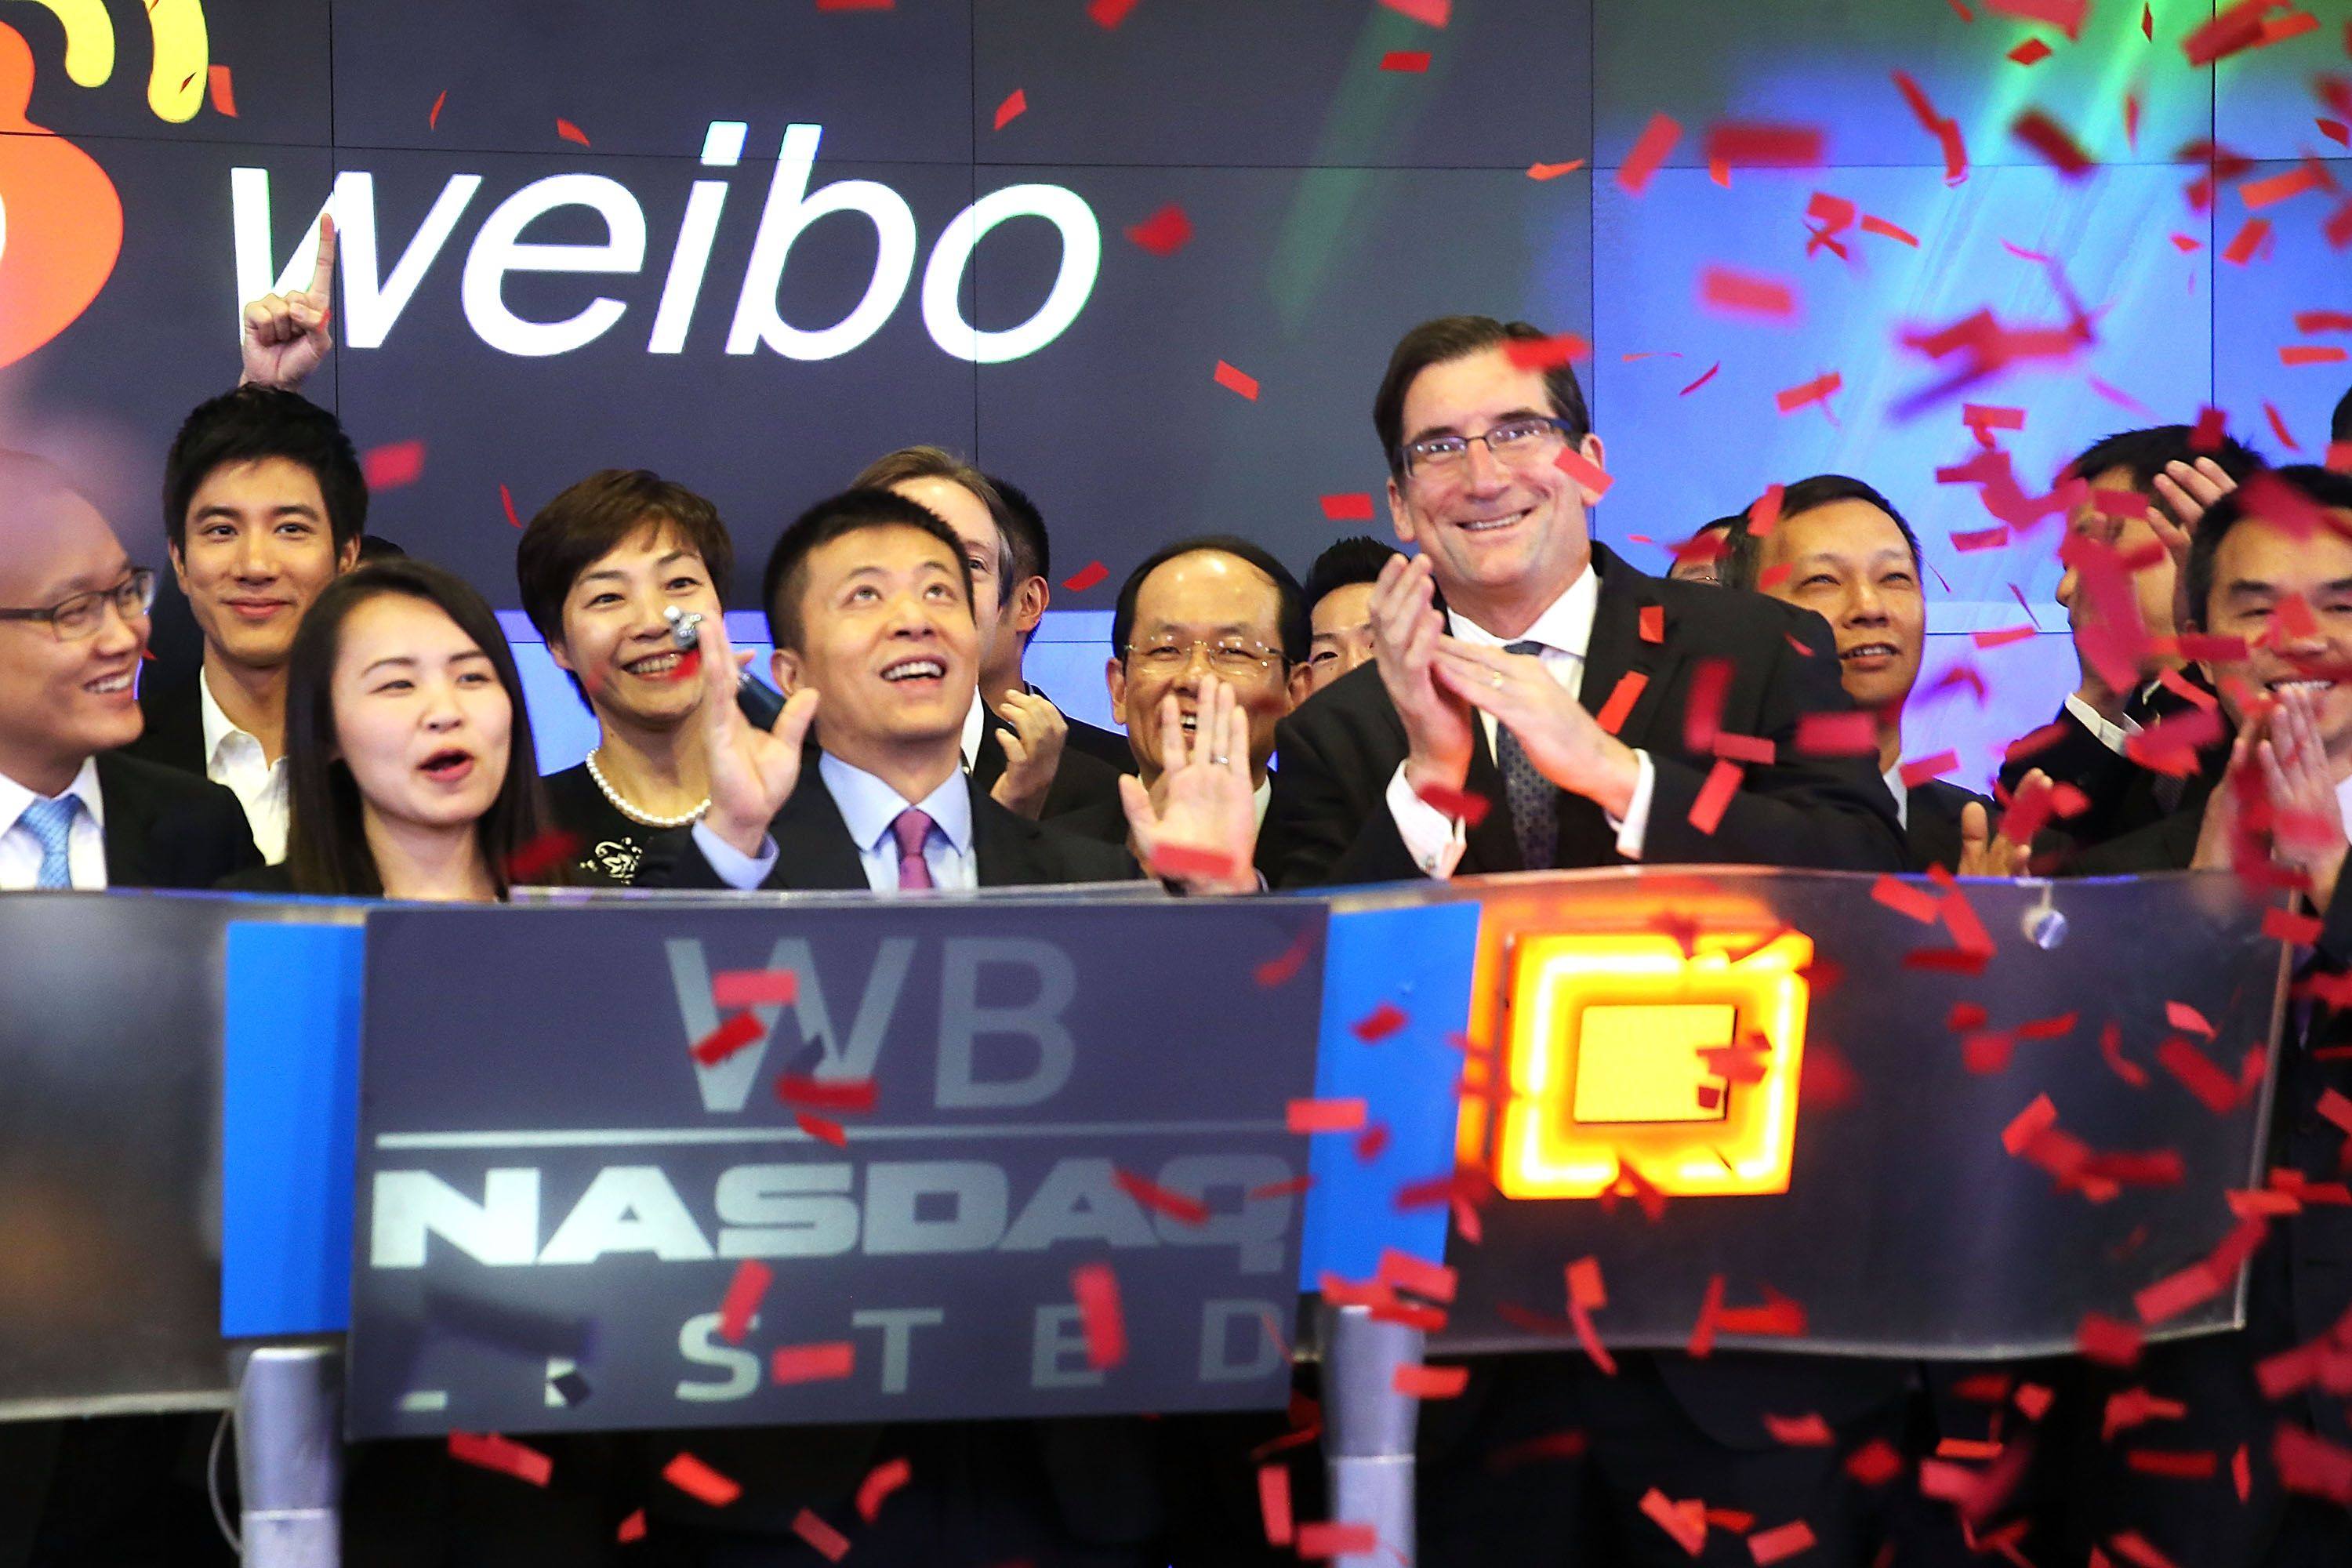 Weibo CEO Charles Chao (centre) celebrates moments after Weibo began trading on the Nasdaq stock exchange on April 17, 2014 in New York. The company is seeking a secondary listing in Hong Kong this month. Photo: AFP